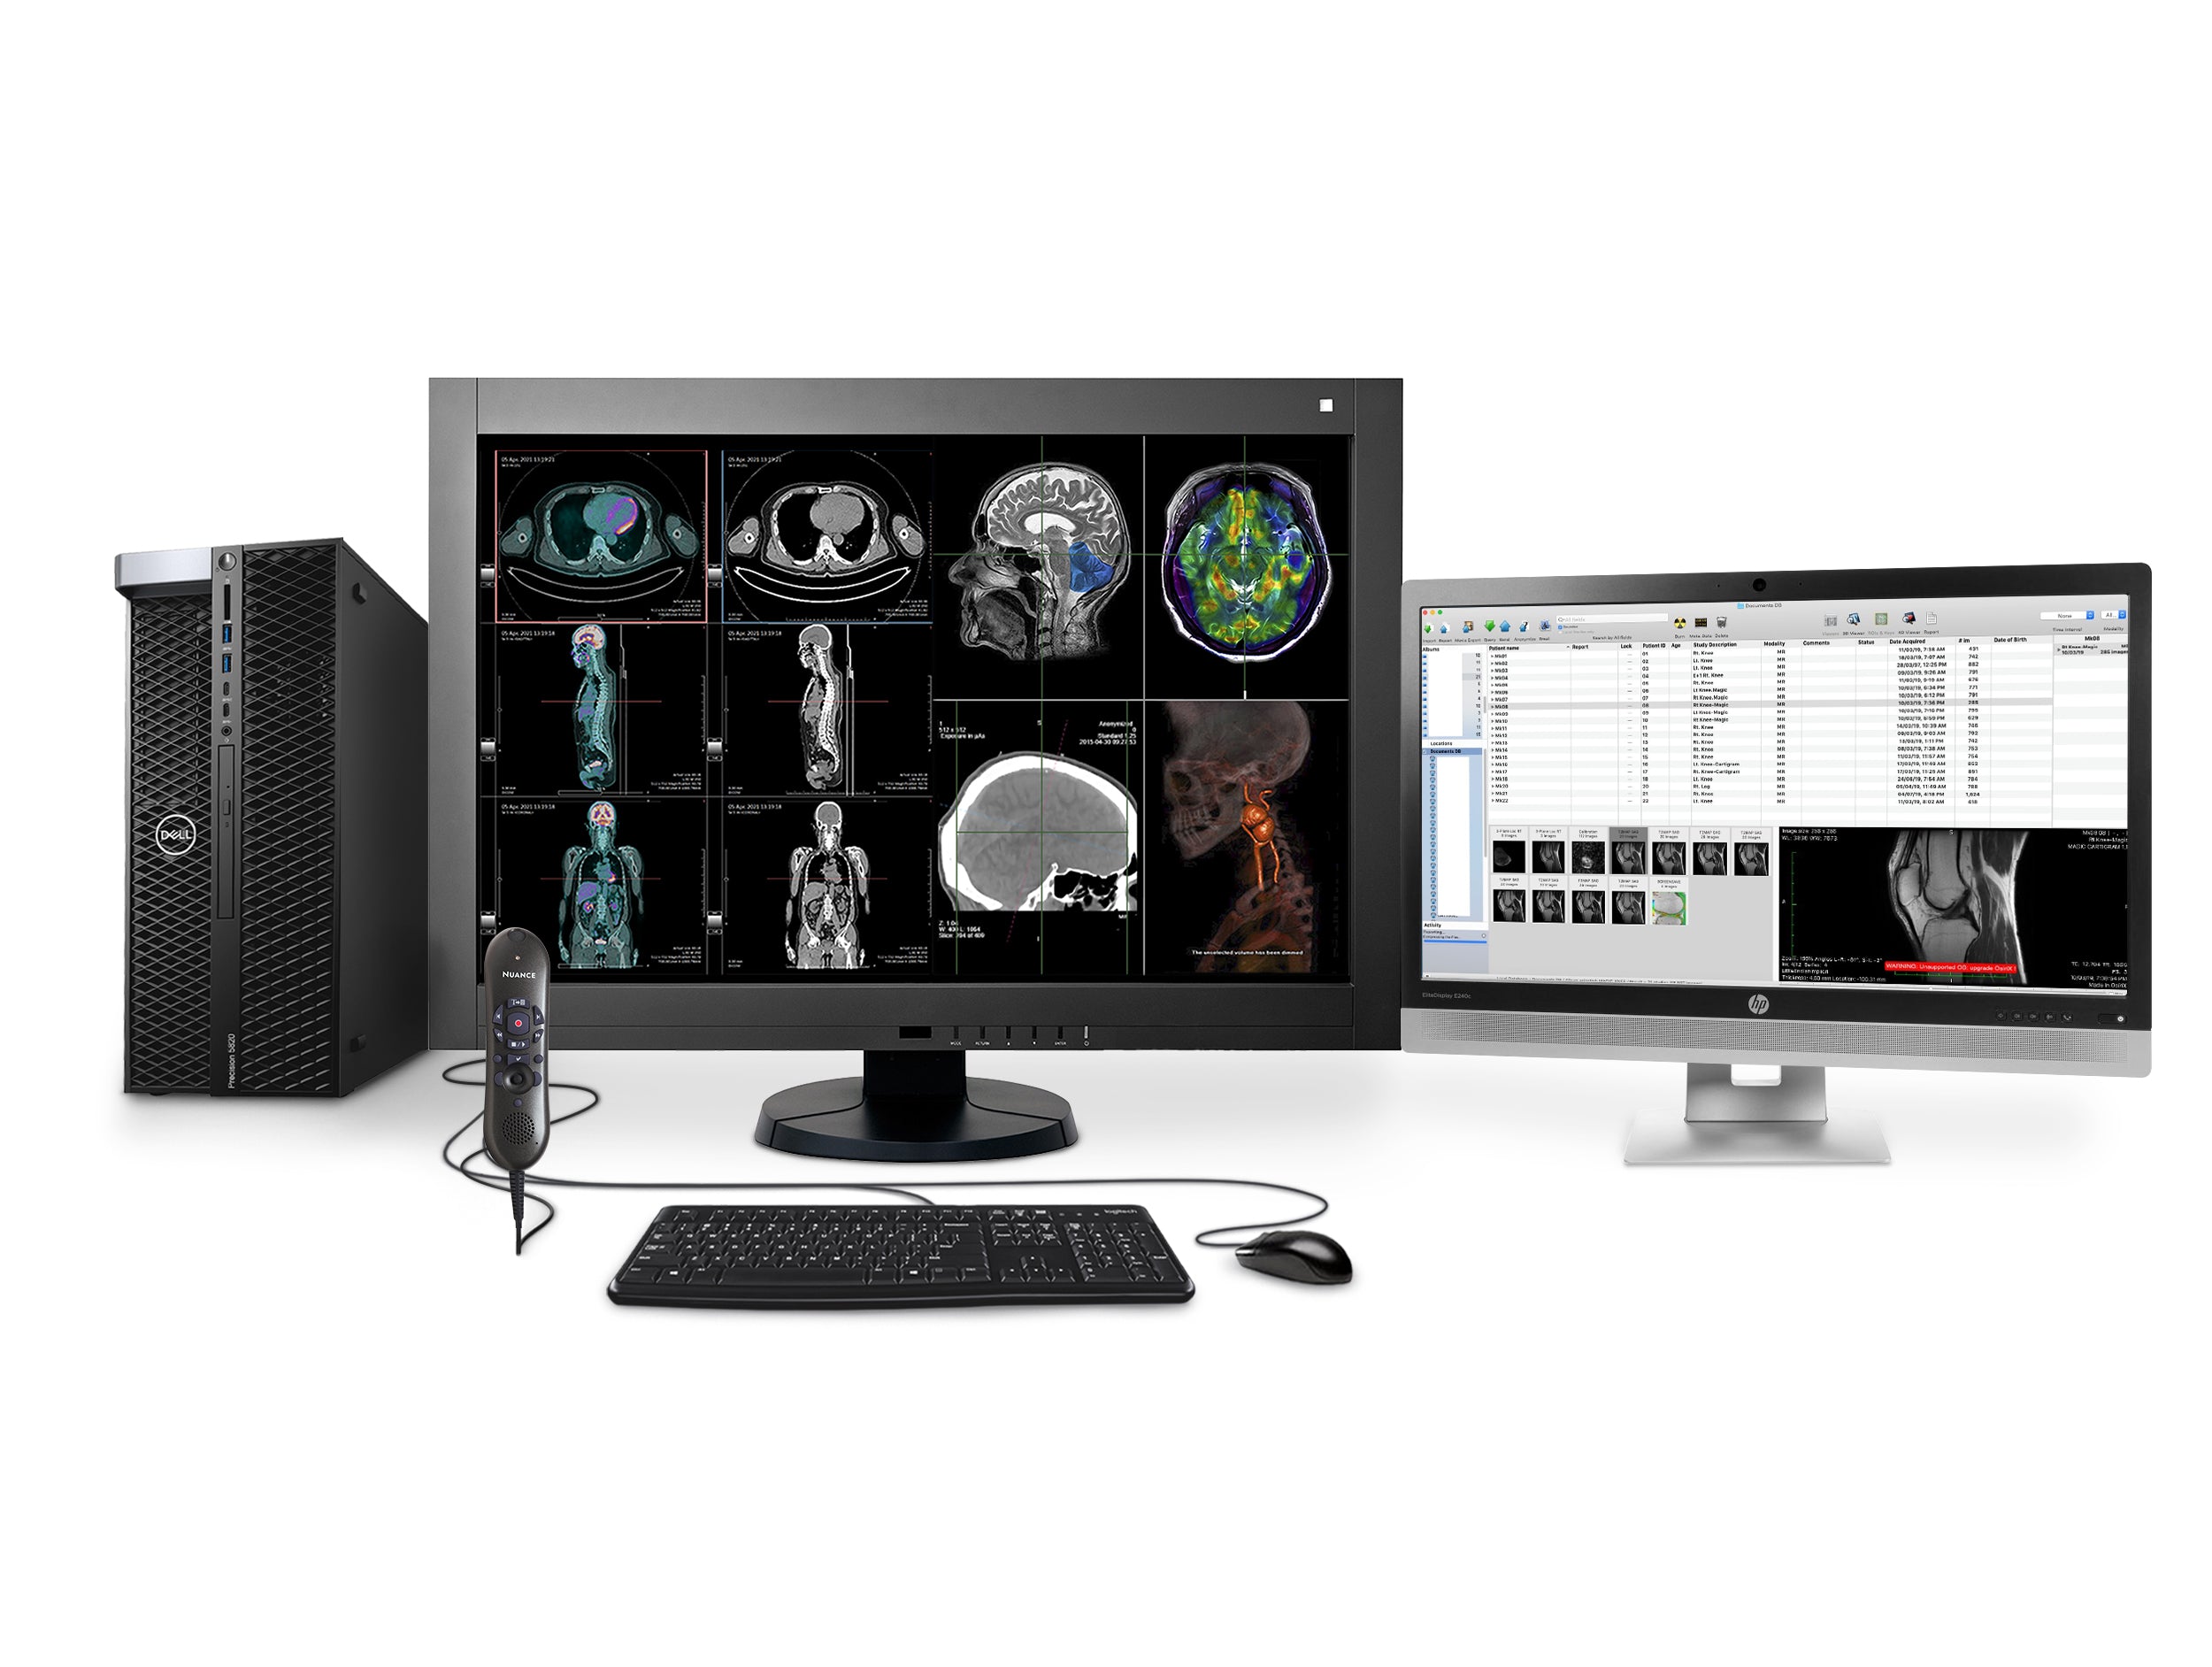 Complete PACS General Radiology Station | Eizo 4MP Color LED Displays | Dell Workstation